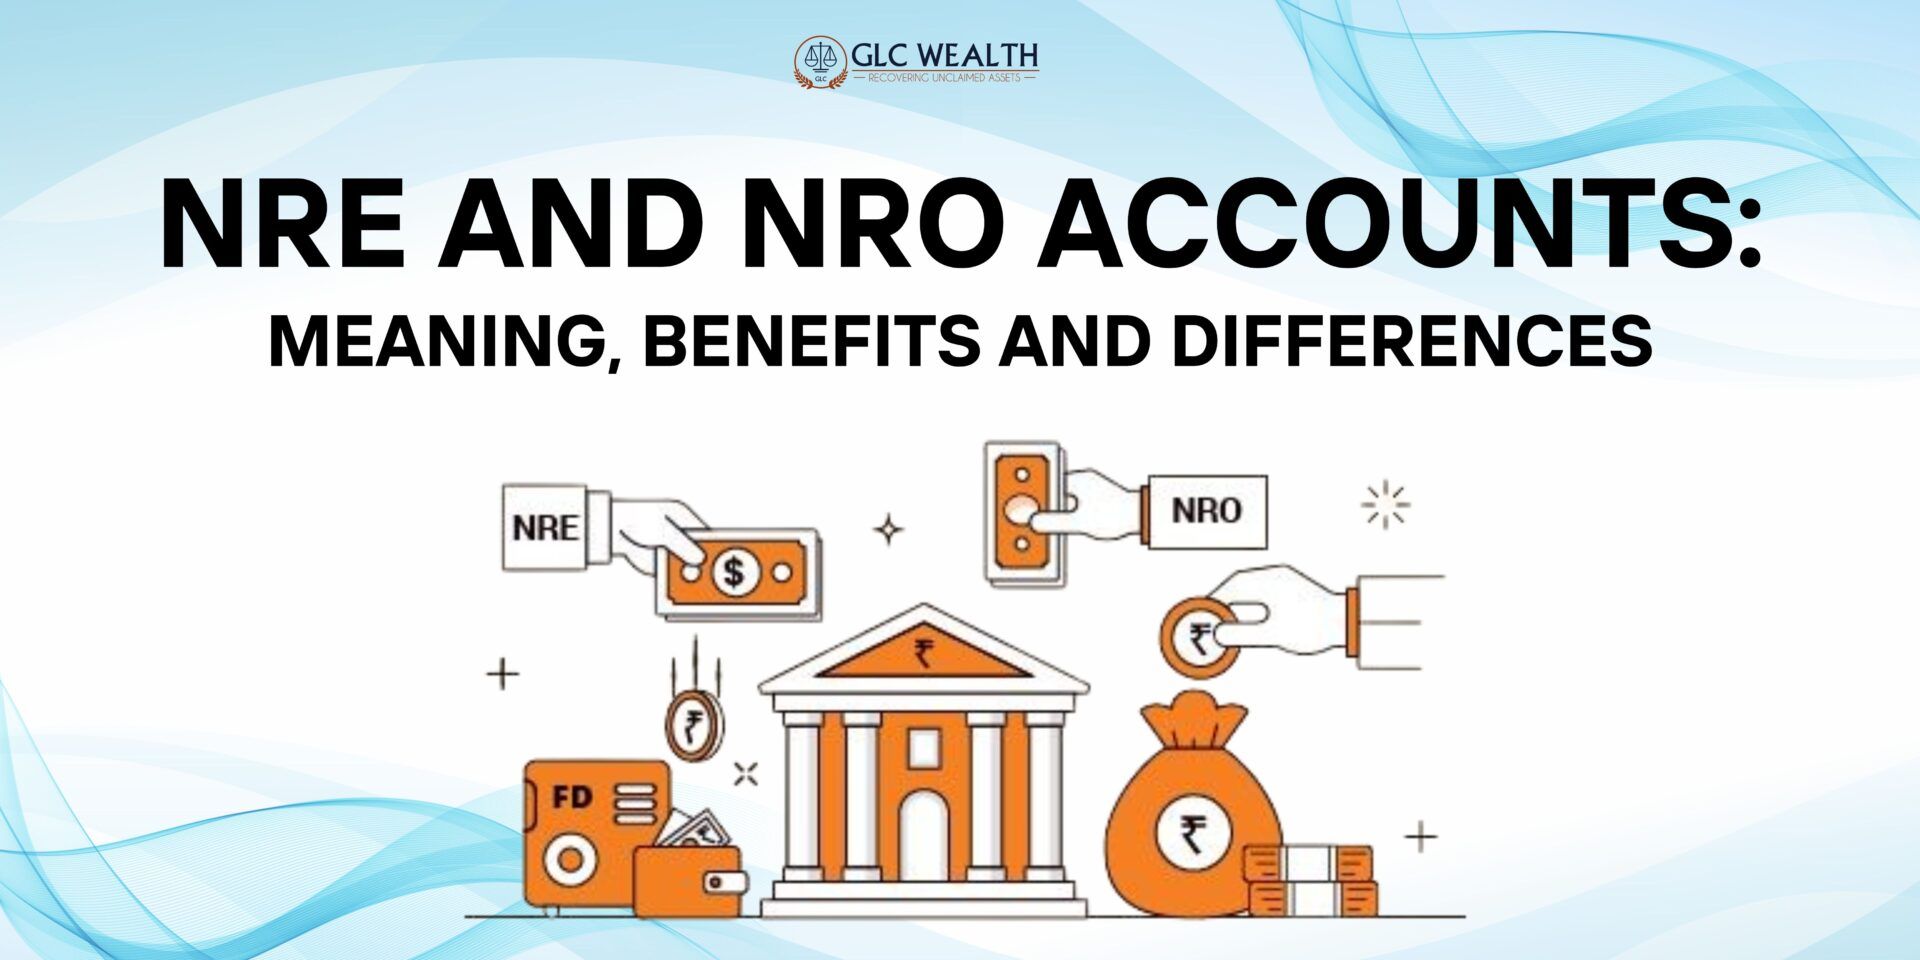 NRE and NRO Accounts: Meaning, Benefits and Differences